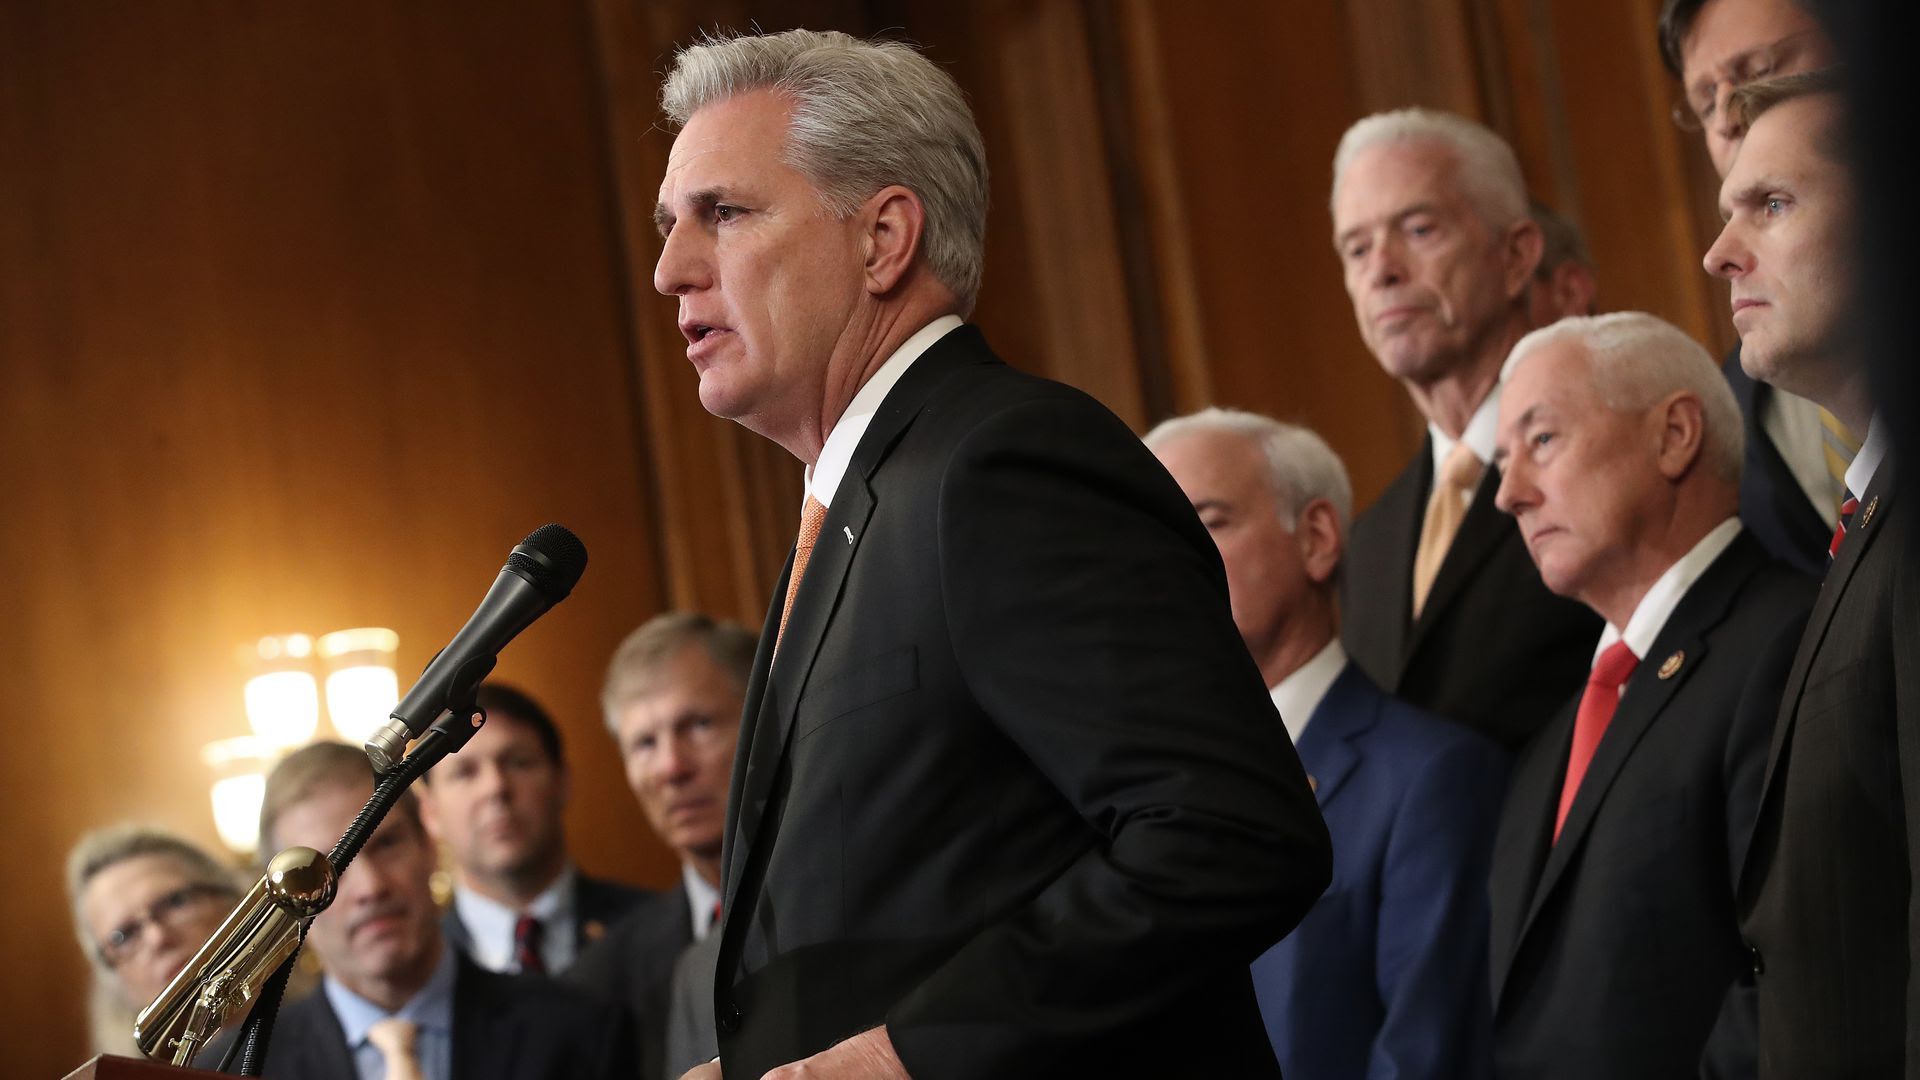 Kevin McCarthy speaks at a press conference held by members of the mostly white male Republican caucus